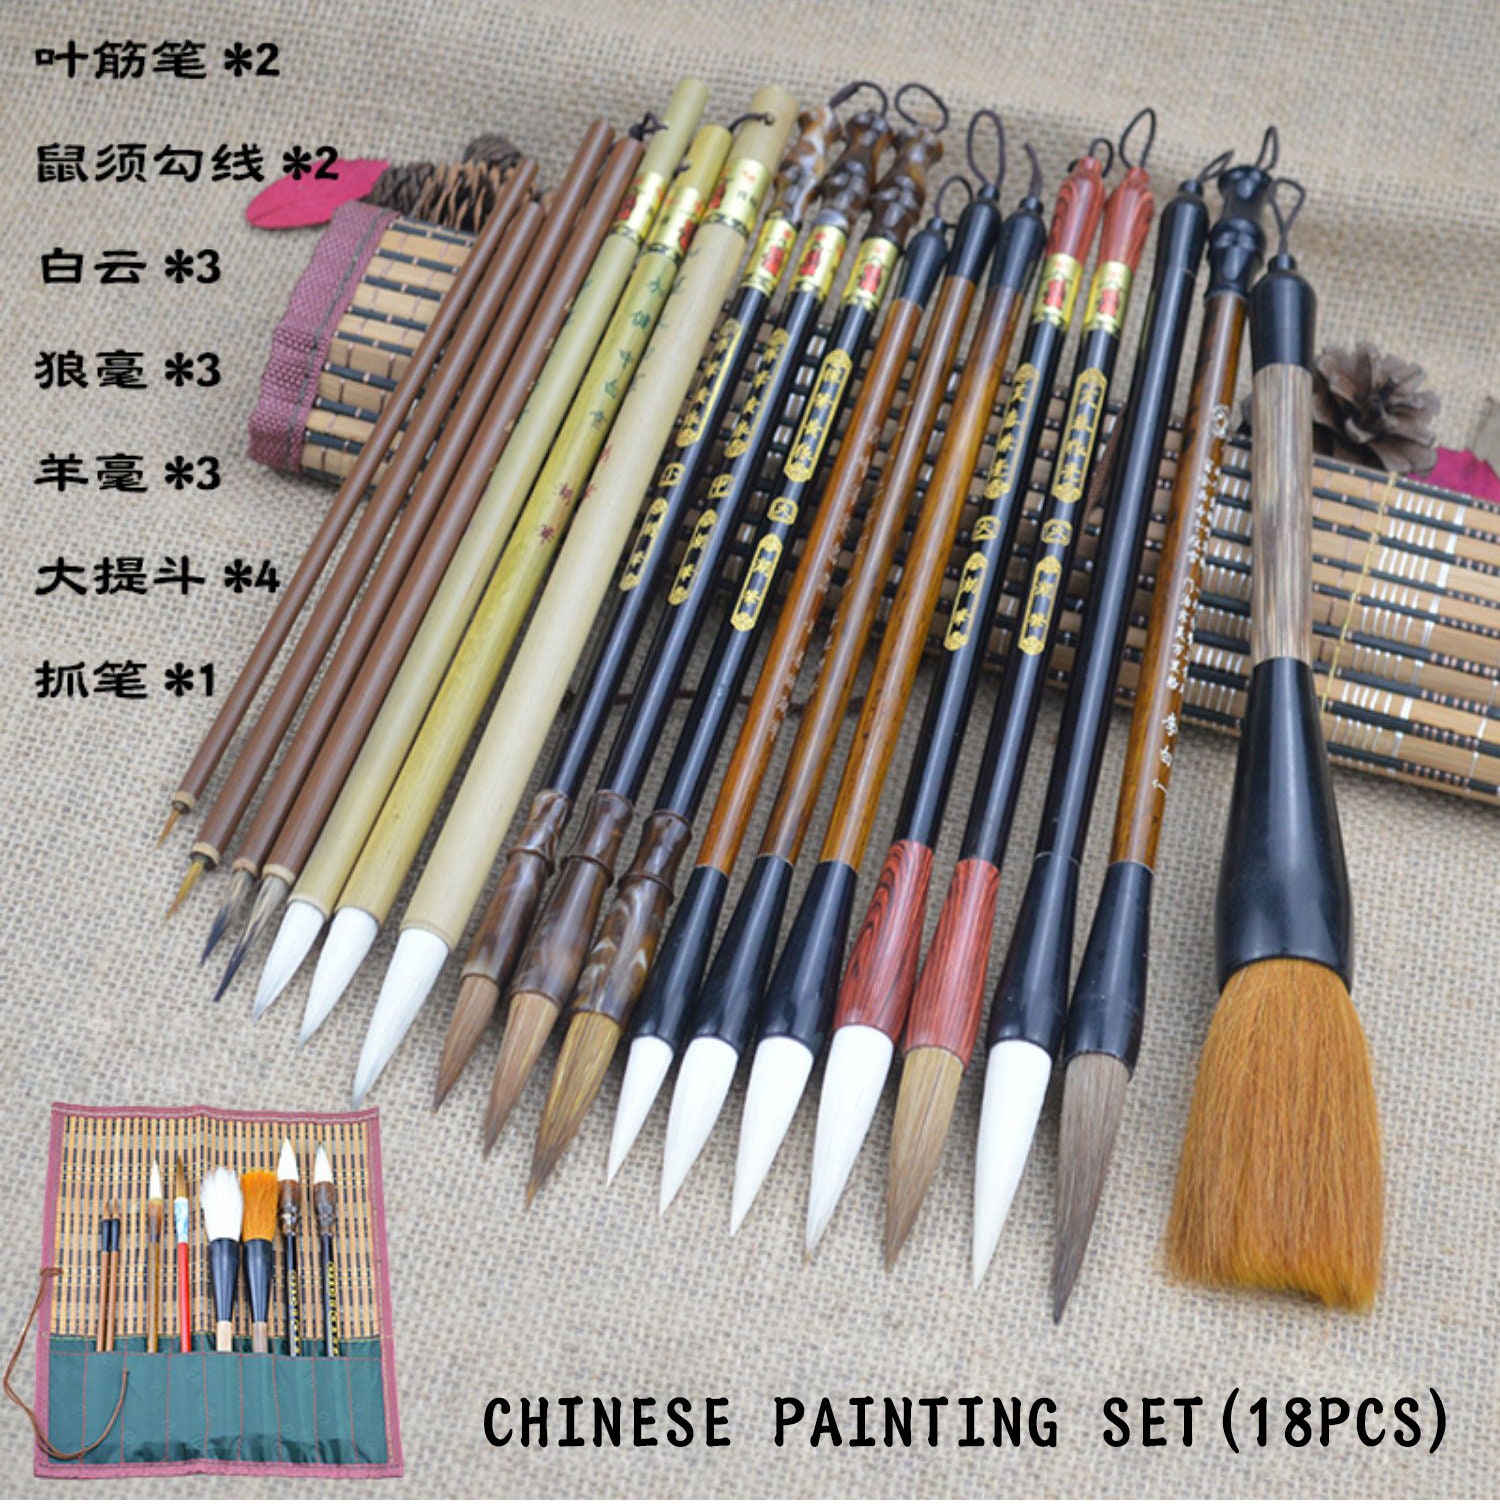 Corciosy 10Pcs Chinese Calligraphy Brushes Set, Painting Writing Brush,  Kanji Japanese Sumi Drawing Brushes with Roll-up Bamboo Brush  Holder,Watercolor Art Brushes for Beginners 